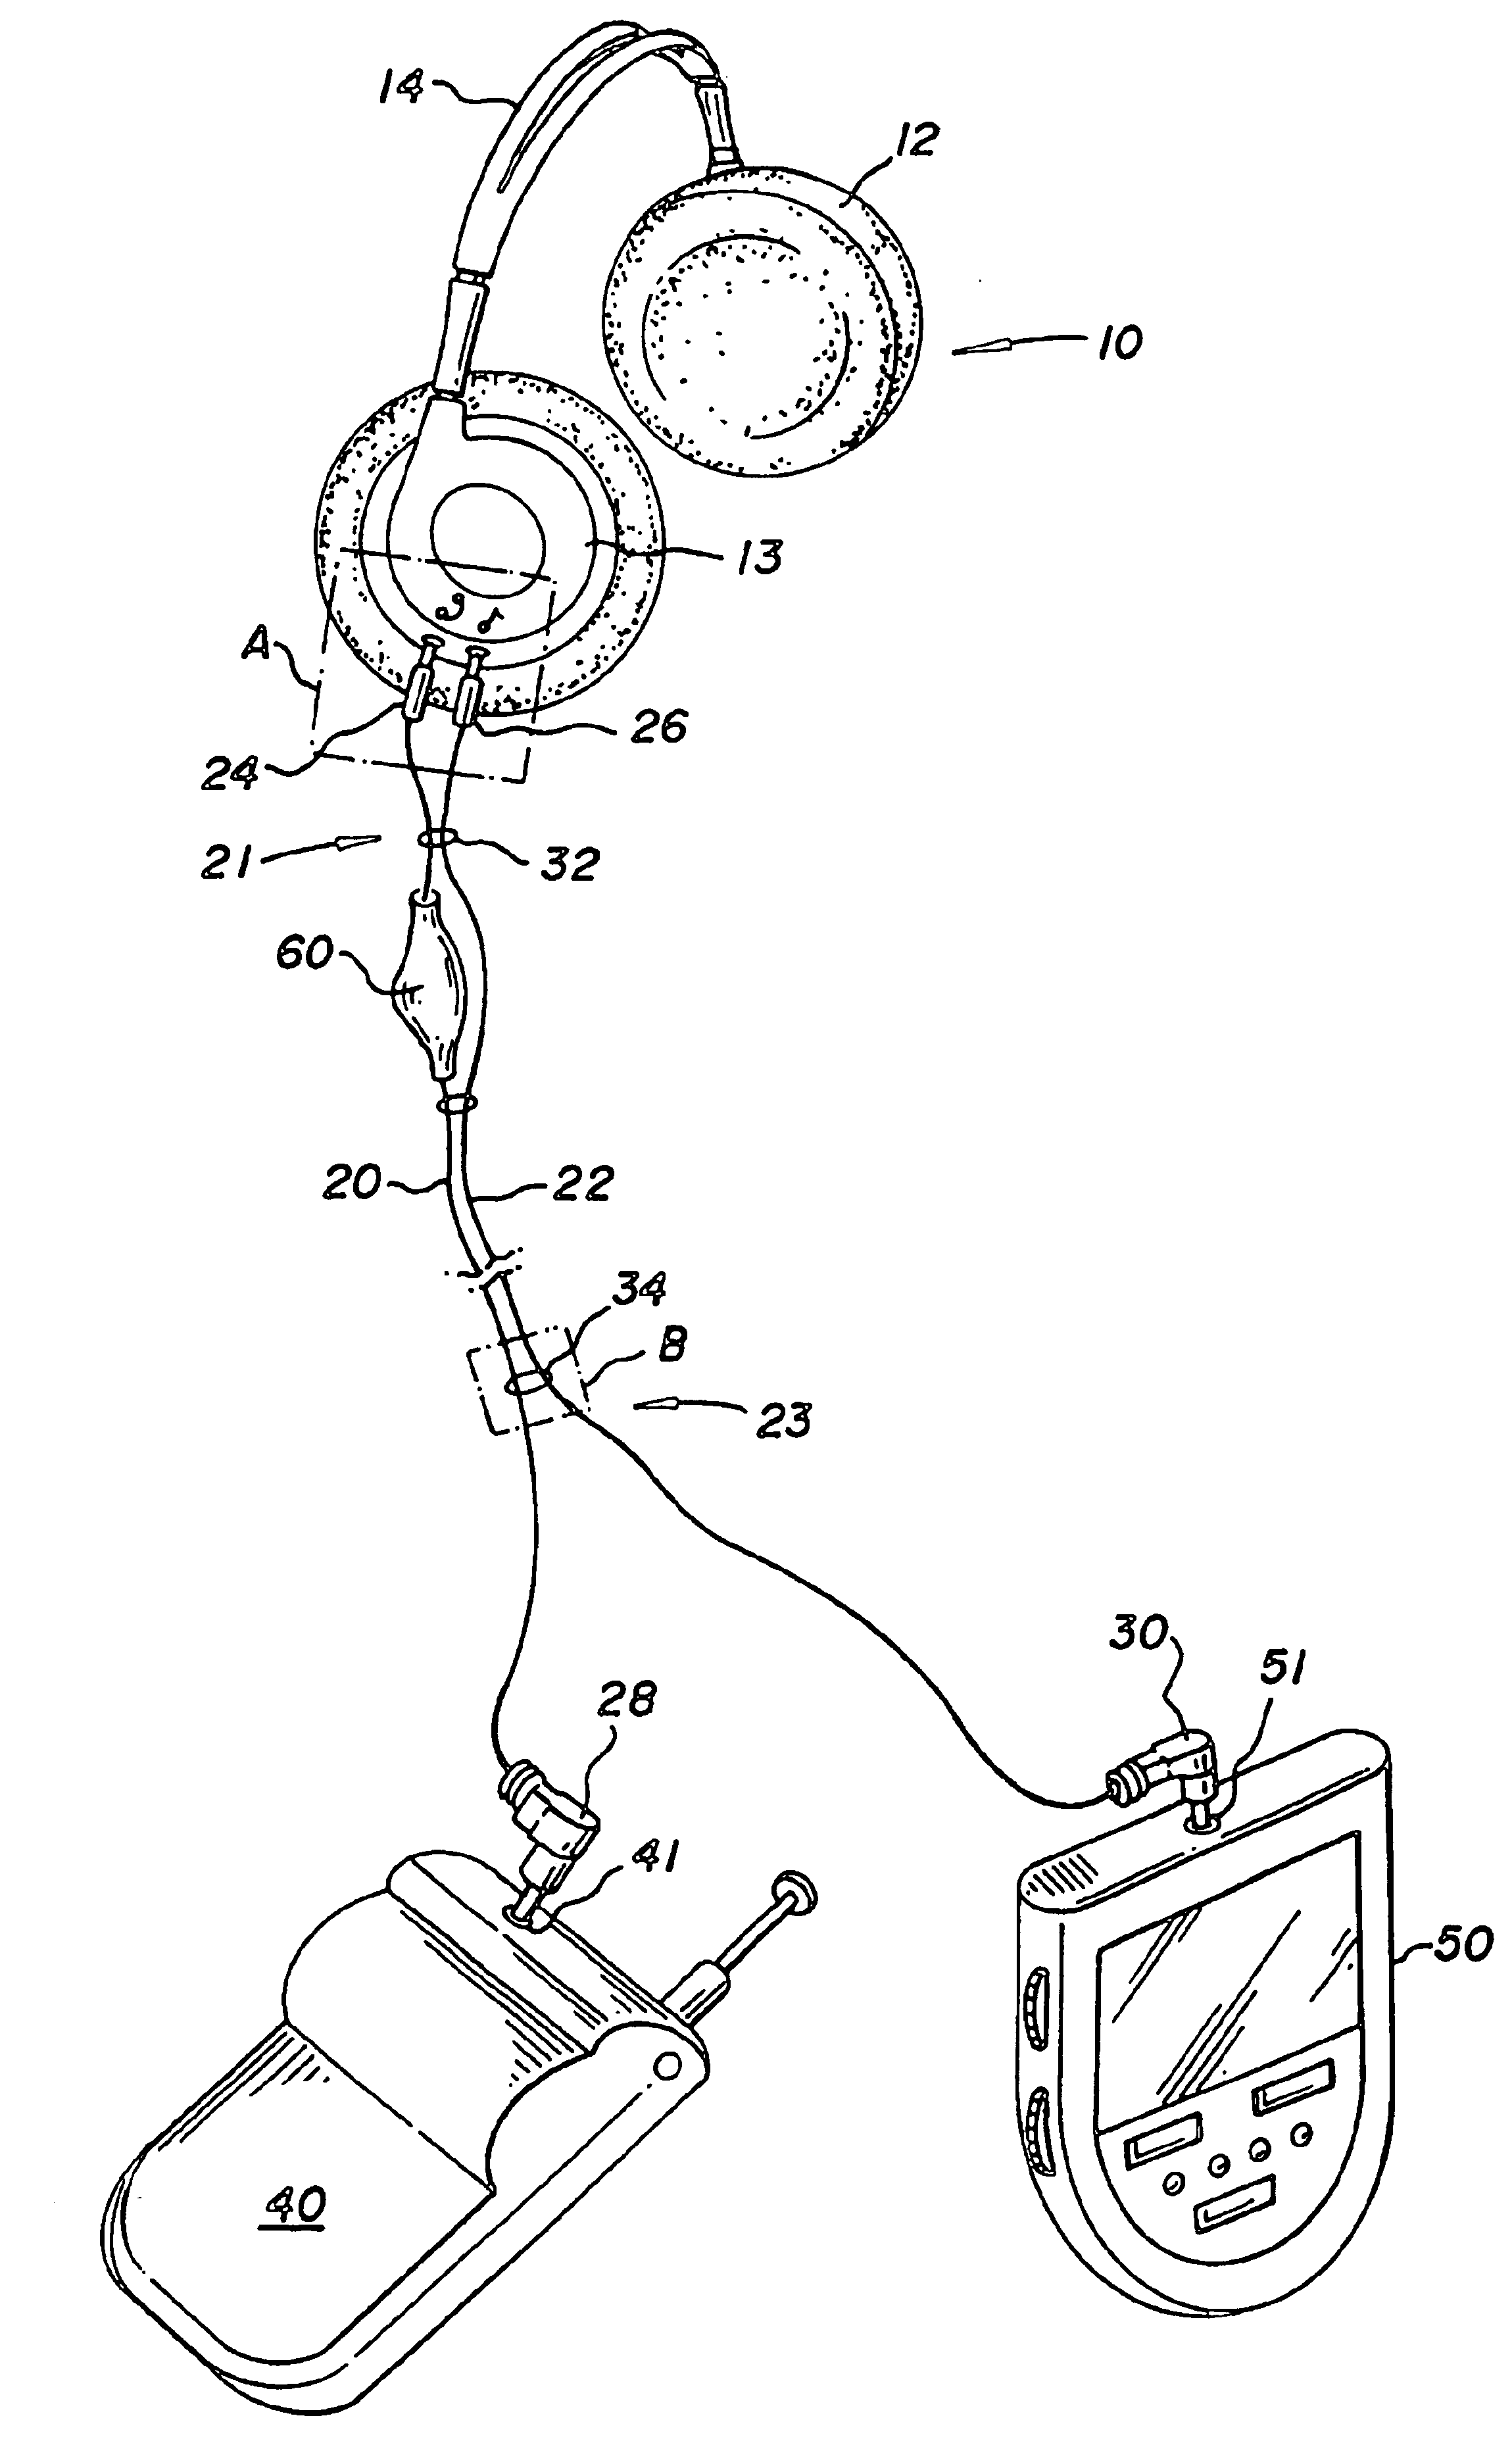 Wireless headphones with selective connection to auxiliary audio devices and a cellular telephone